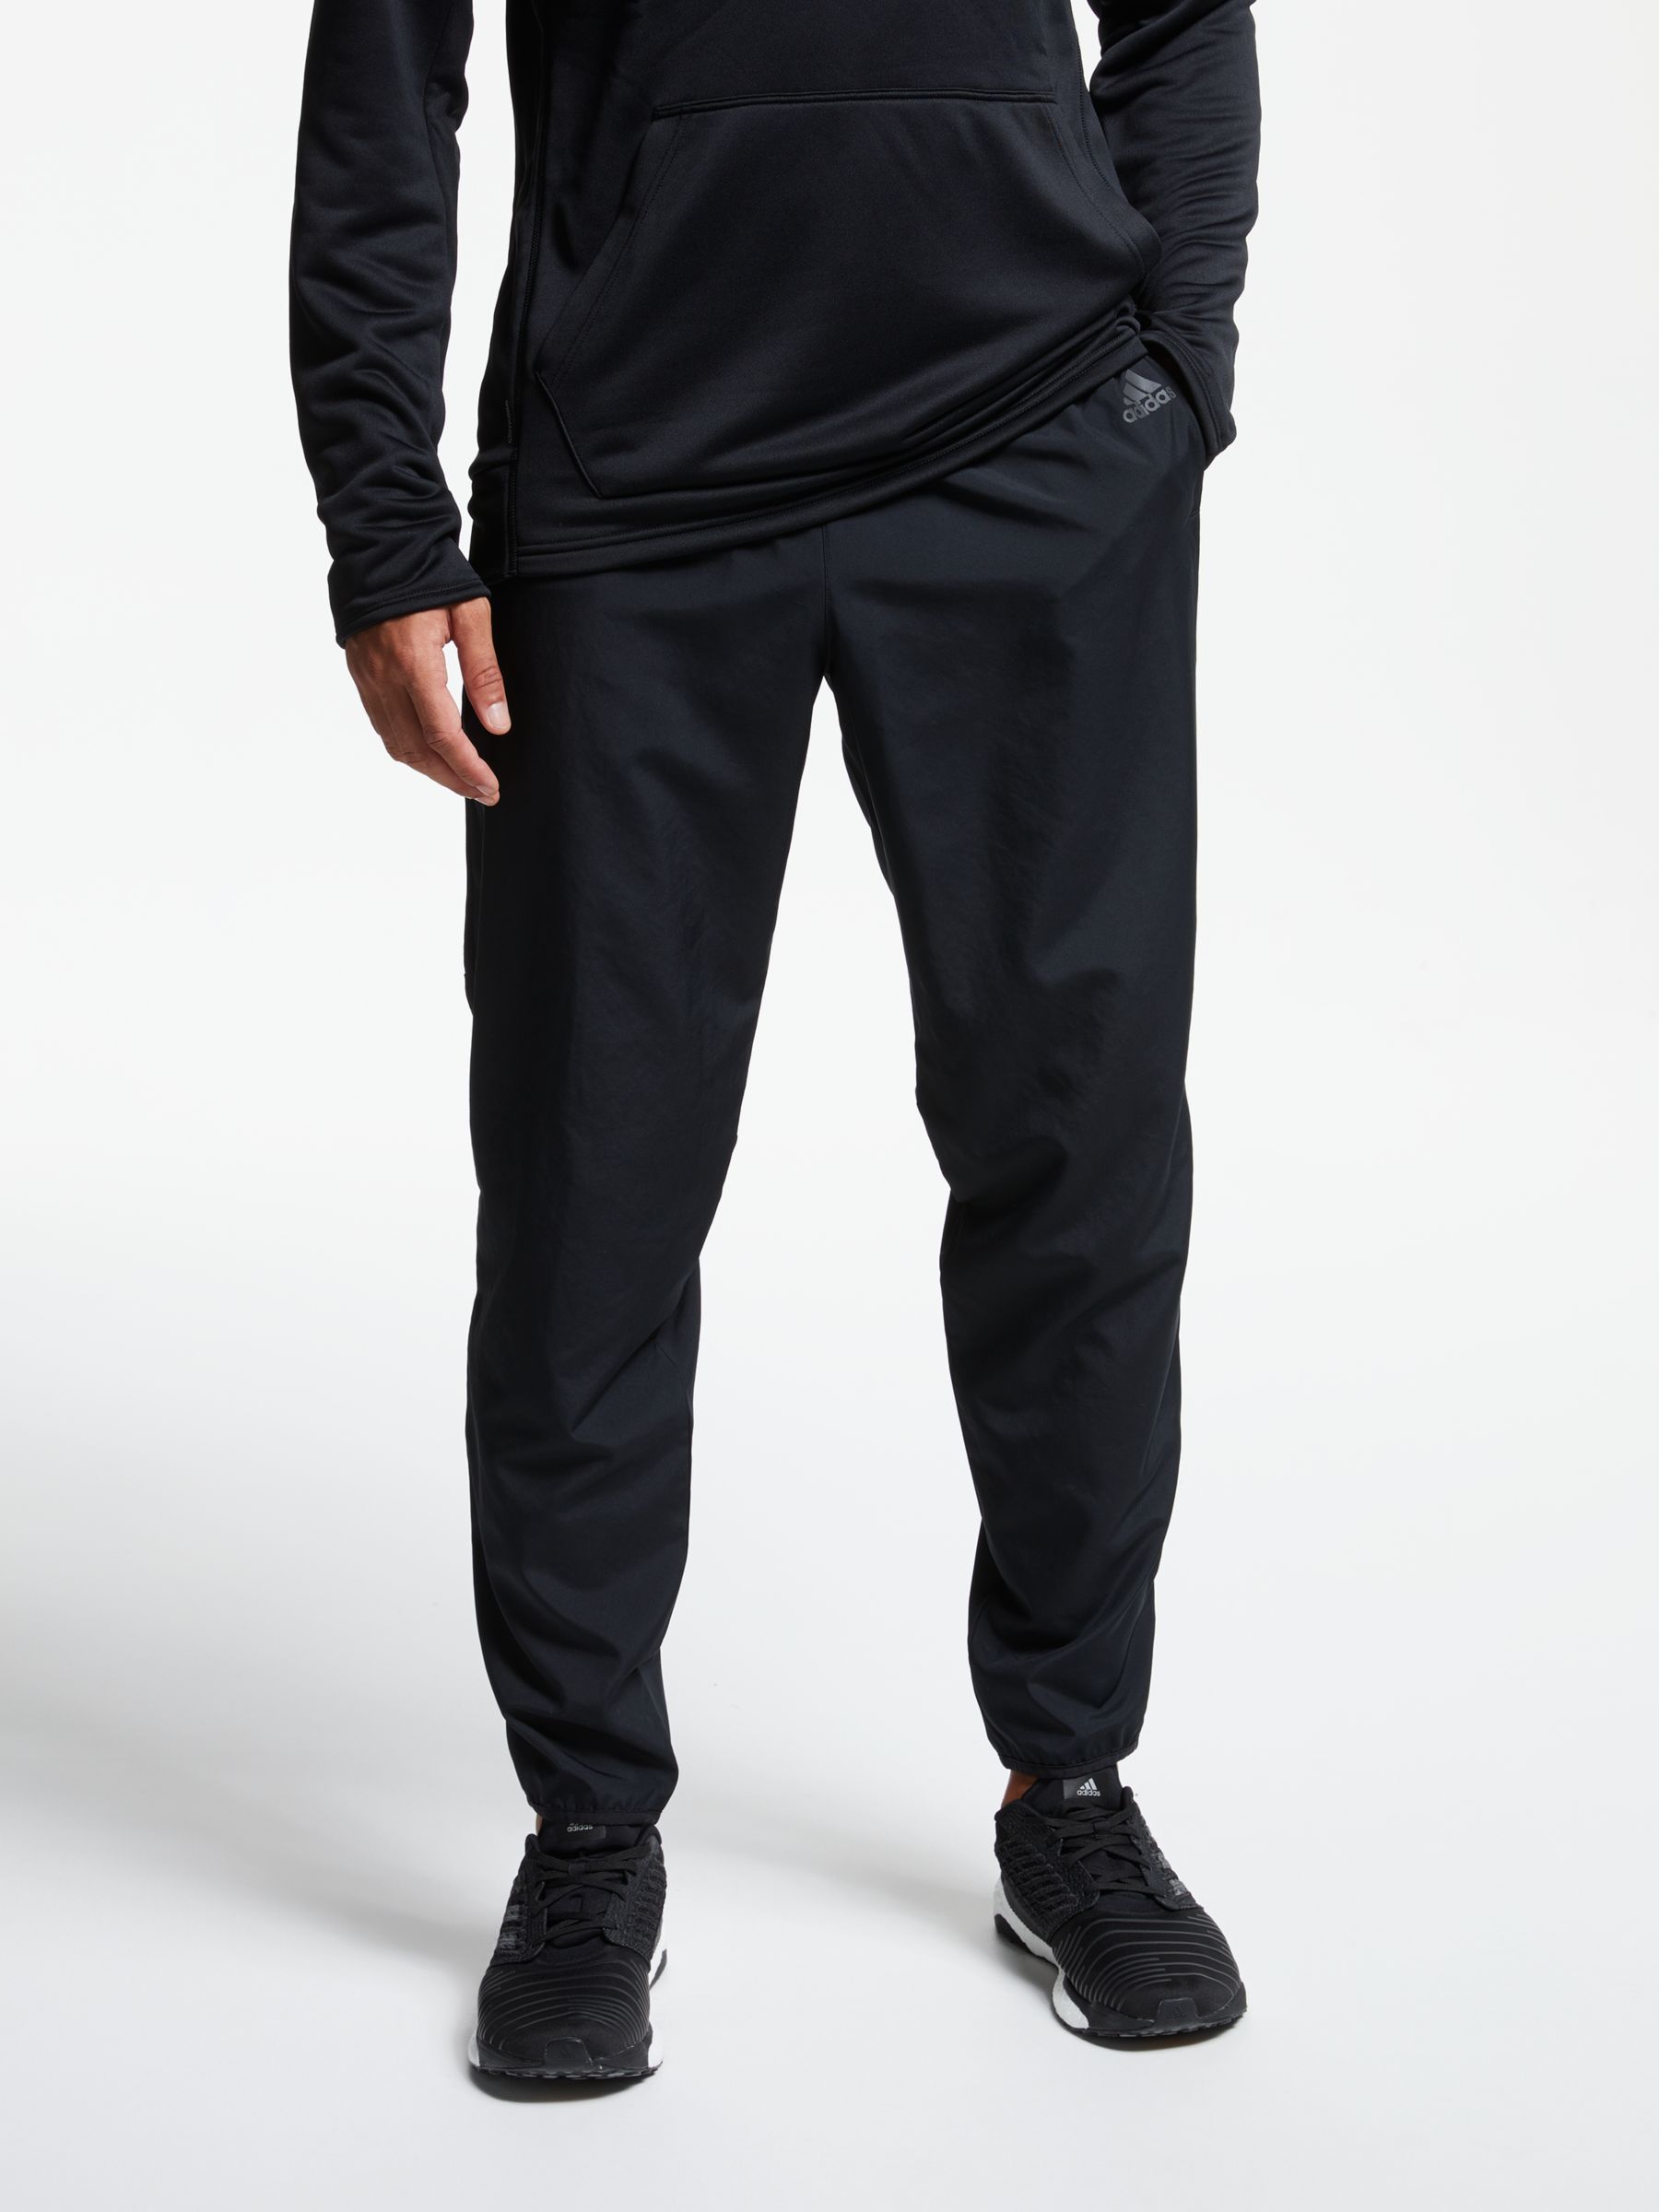 all black adidas tracksuit bottoms